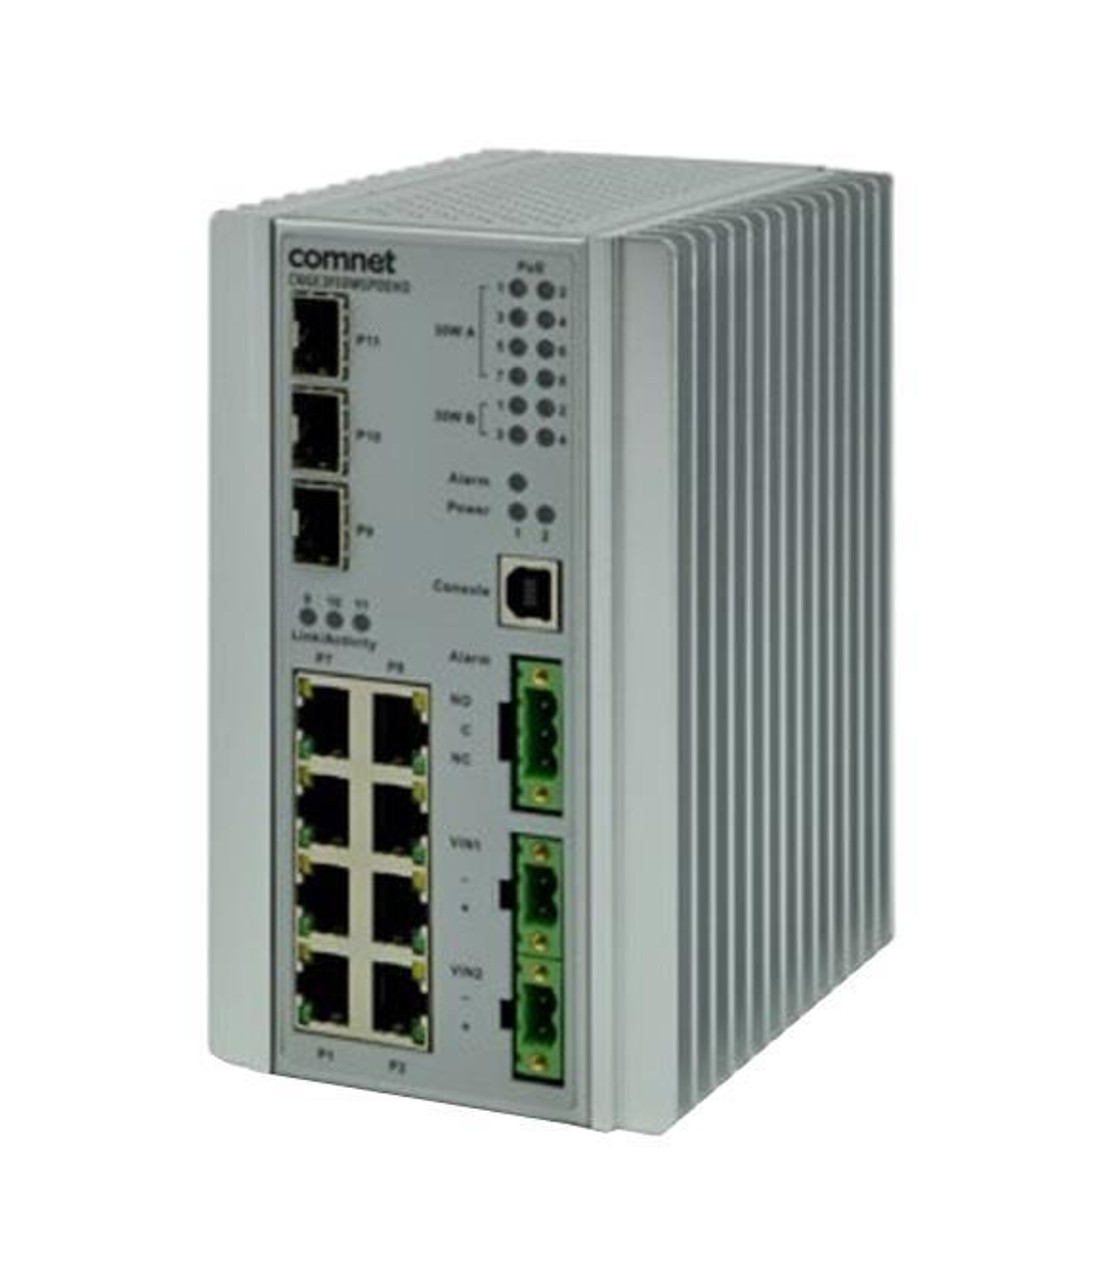 ComNet CNGE3FE8MS Ethernet Switch - 11 Ports - Manageable - 3 Layer Supported - Modular - 3 SFP Slots - Optical Fiber Twisted Pair - DIN Rail